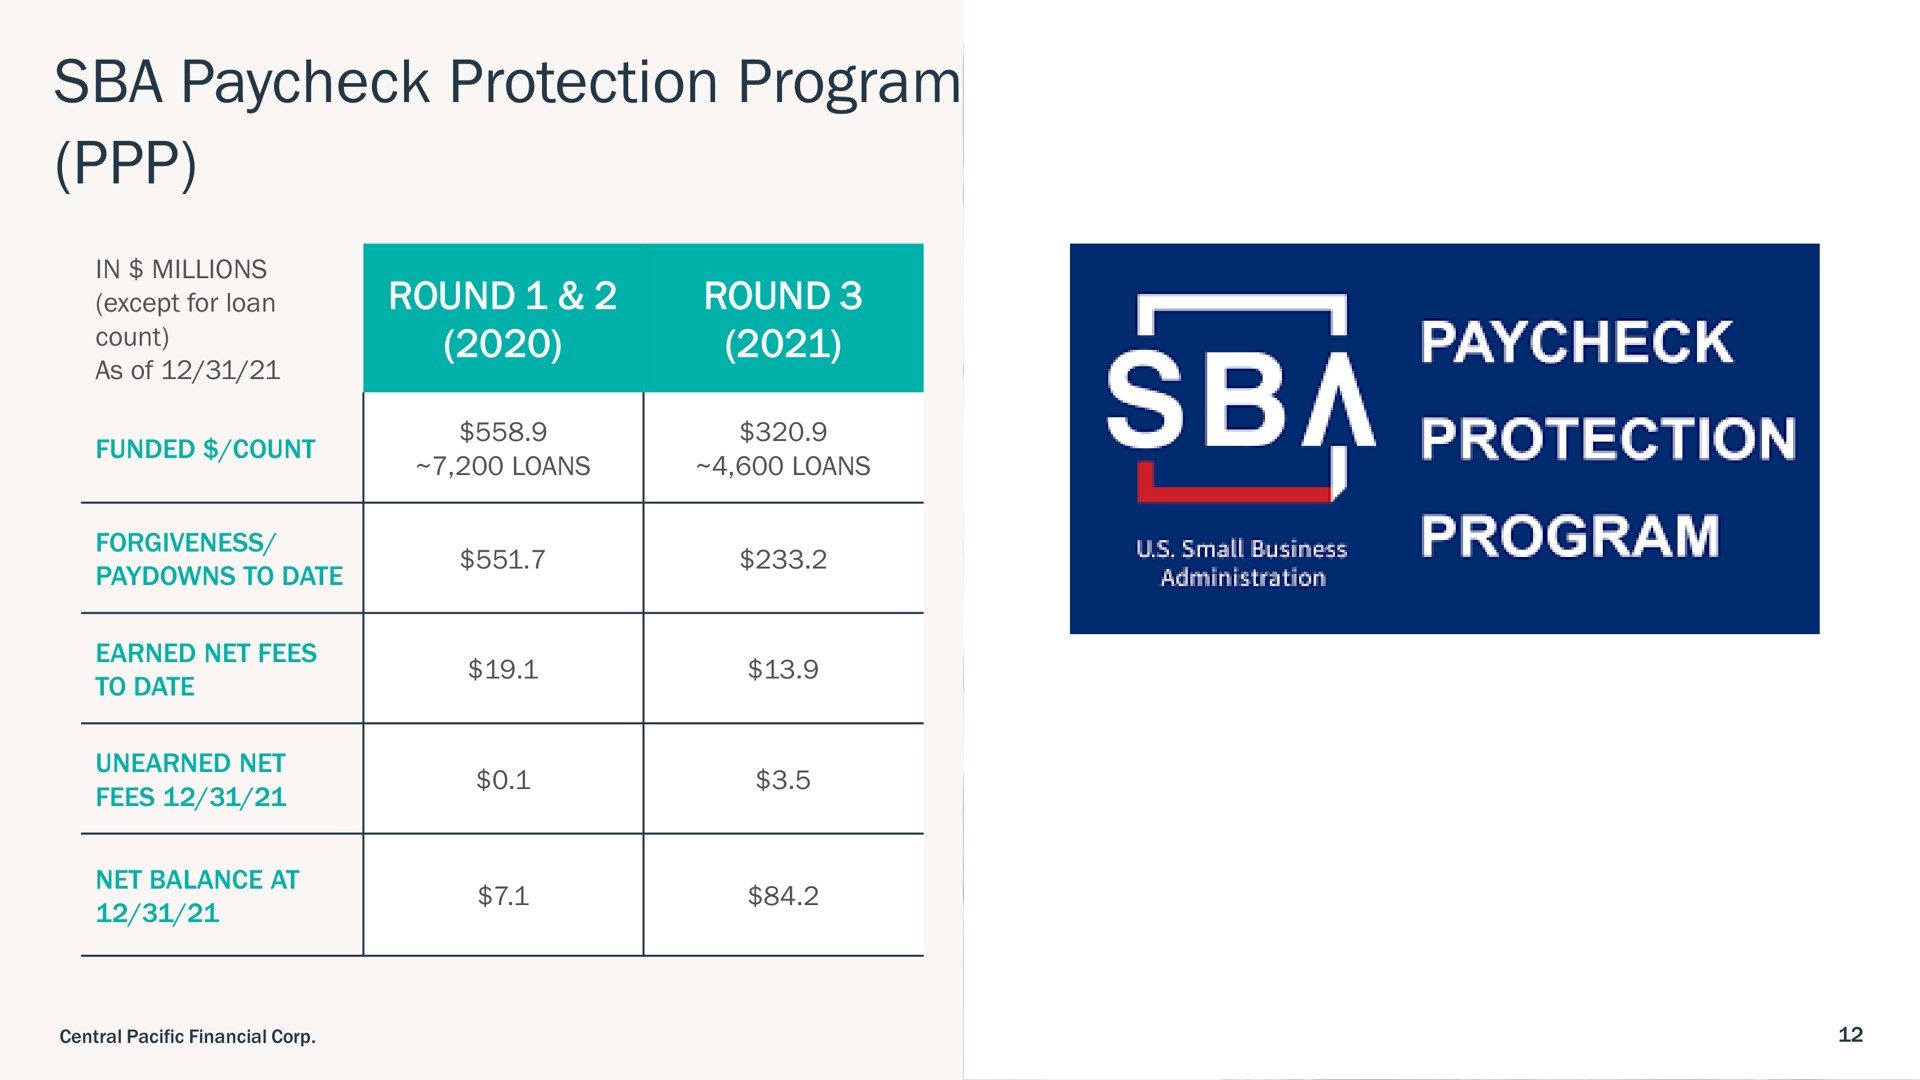 protection program count a | Central Pacific Financial